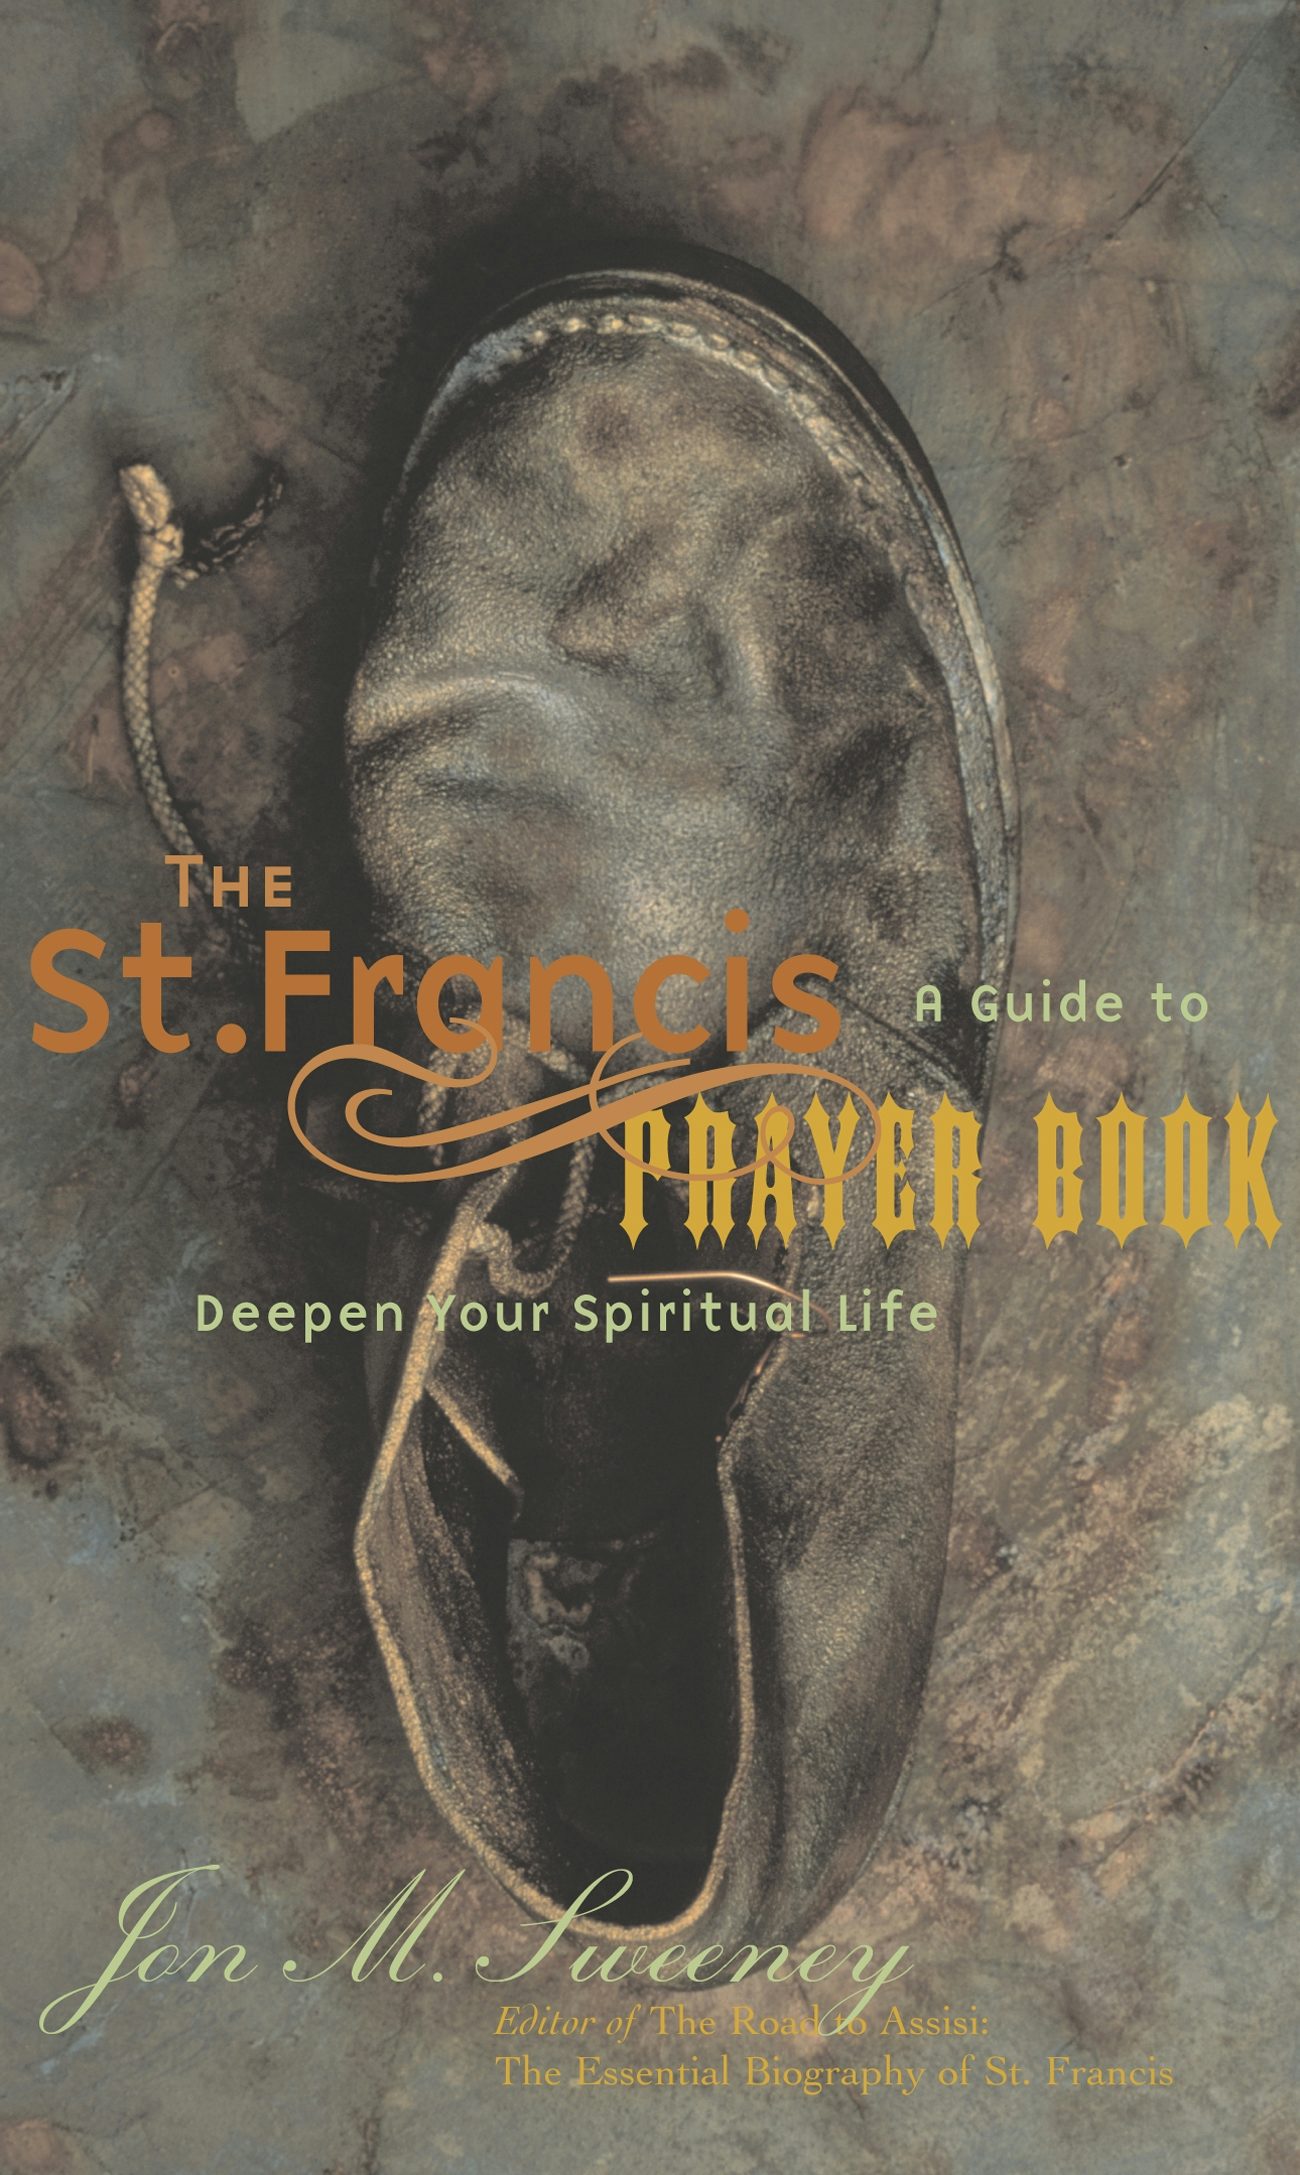 Book:　The　St.　to　Deepen　Spiritual　Your　Francis　Prayer　Guide　A　Life